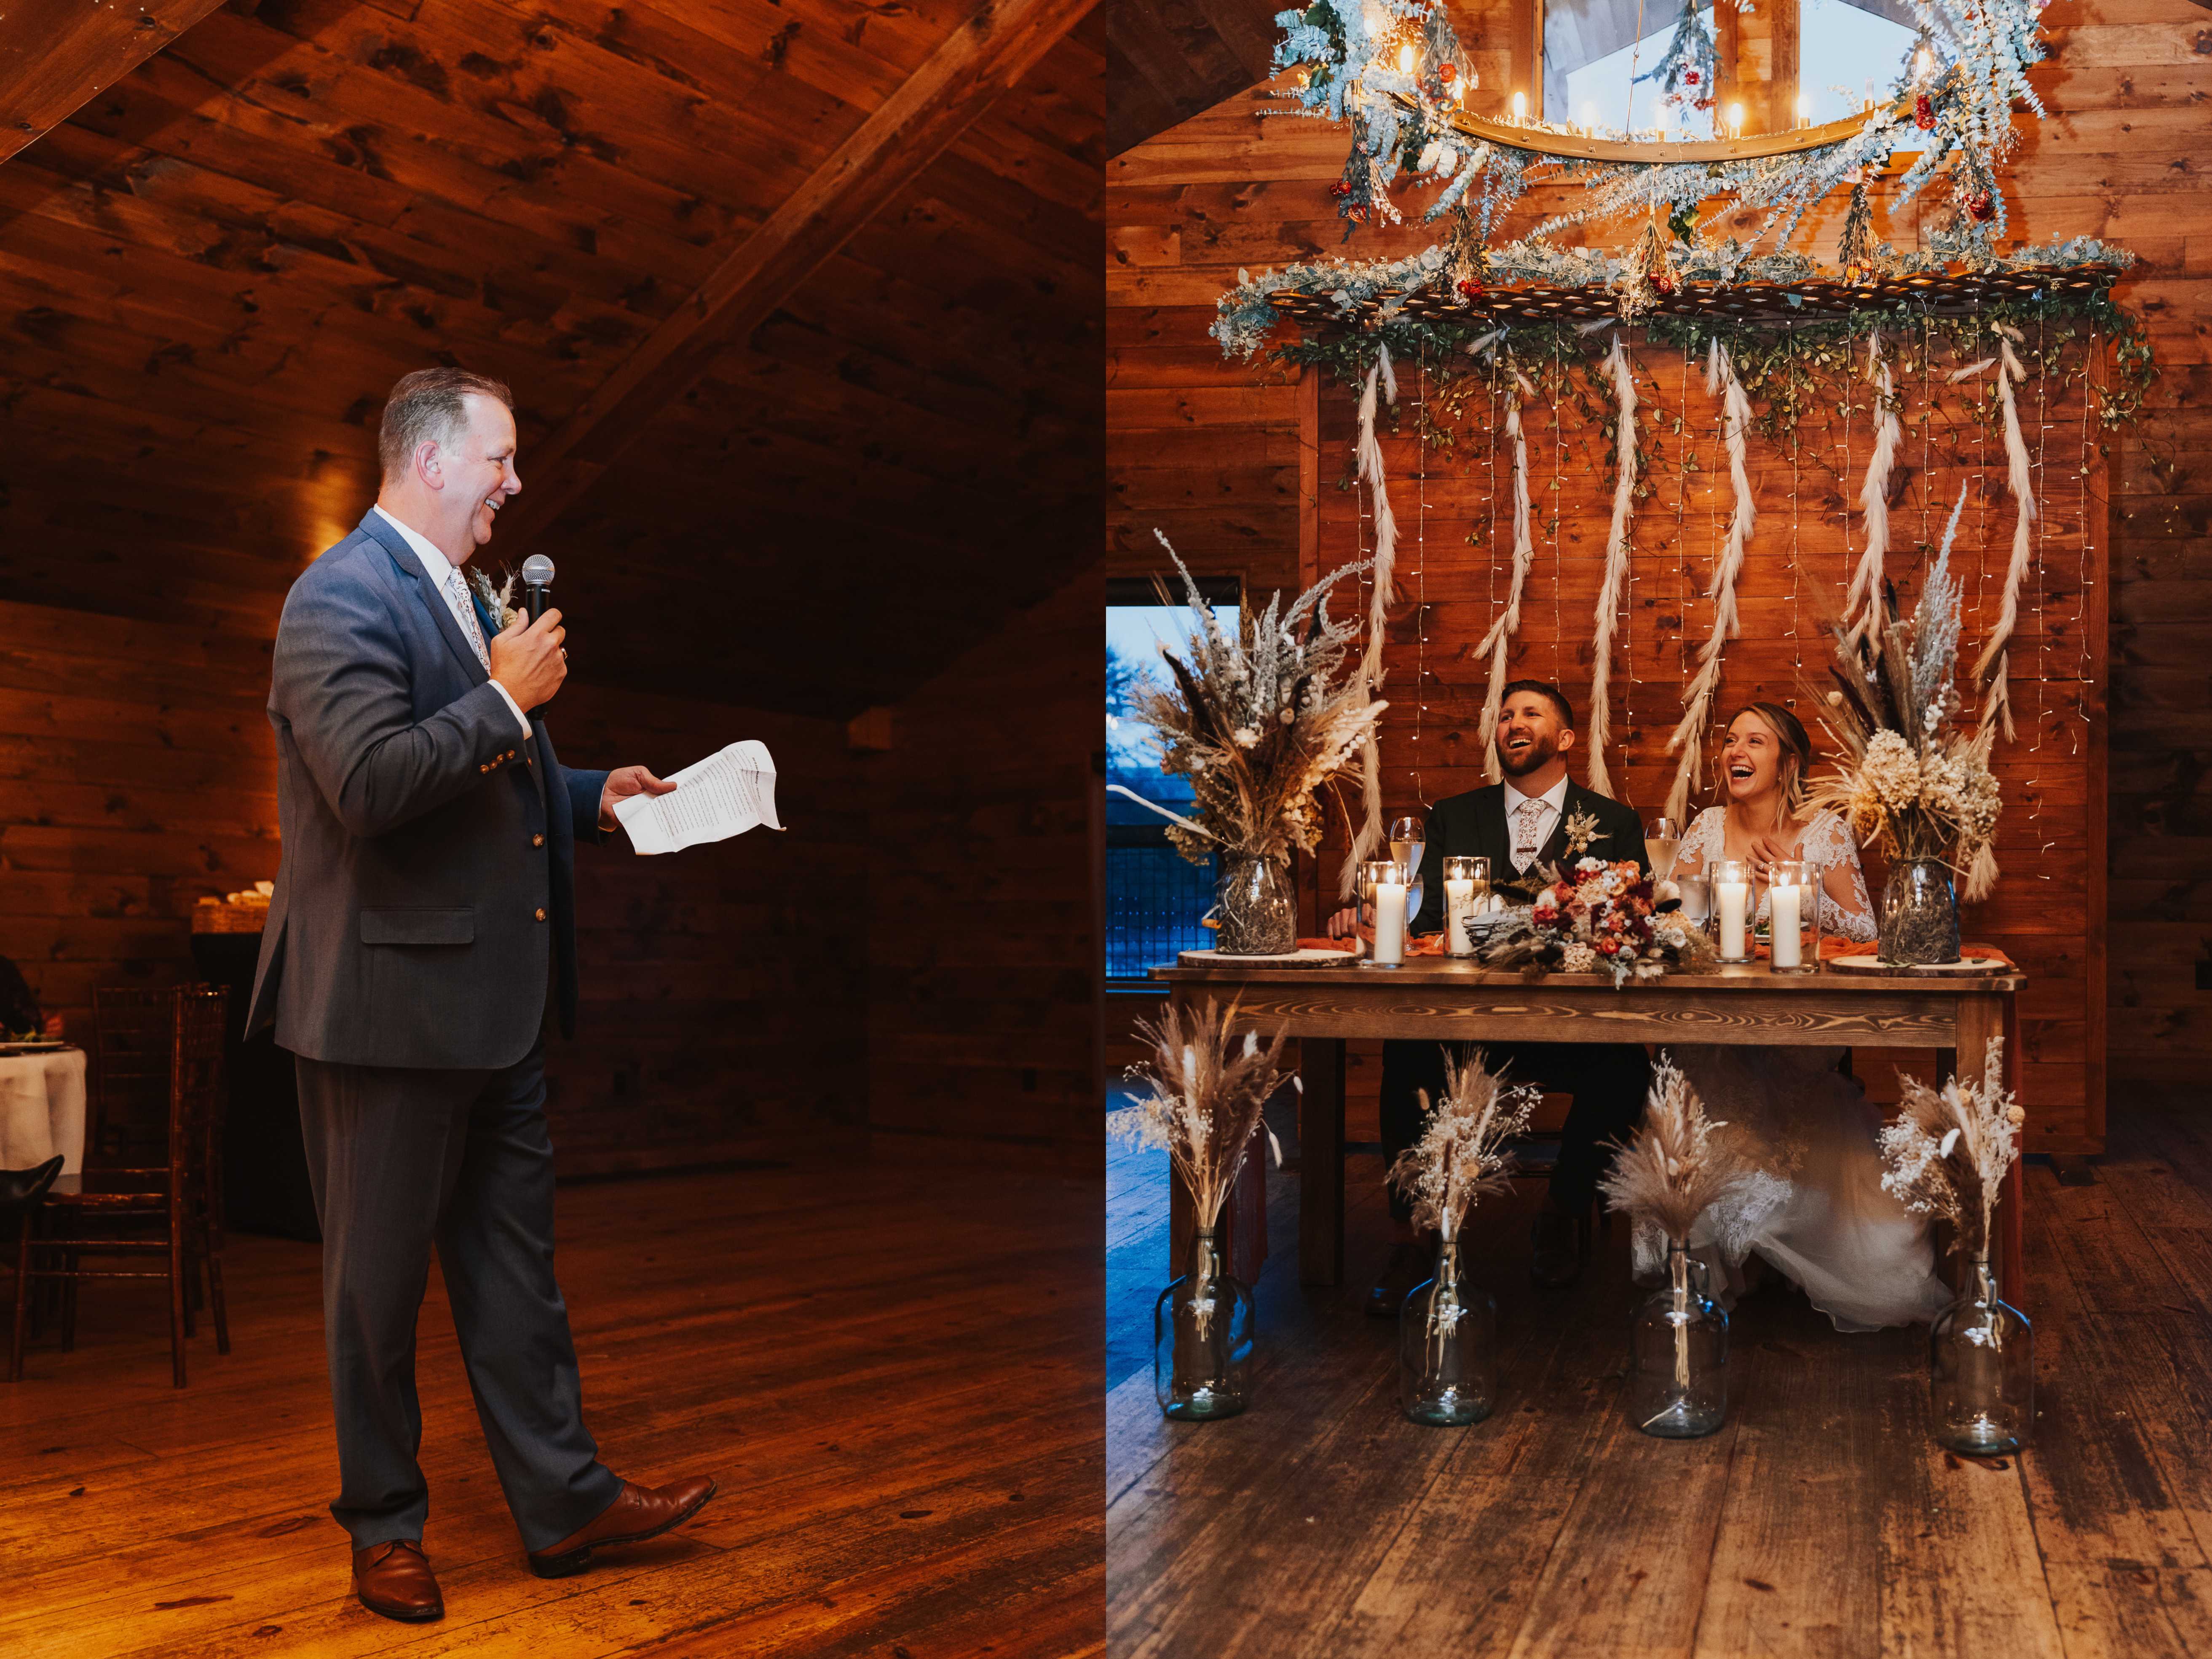 2 photos side by side, the left is of a man giving a speech during an indoor wedding reception, the right is of a bride and groom laughing while sitting at their table during the speech